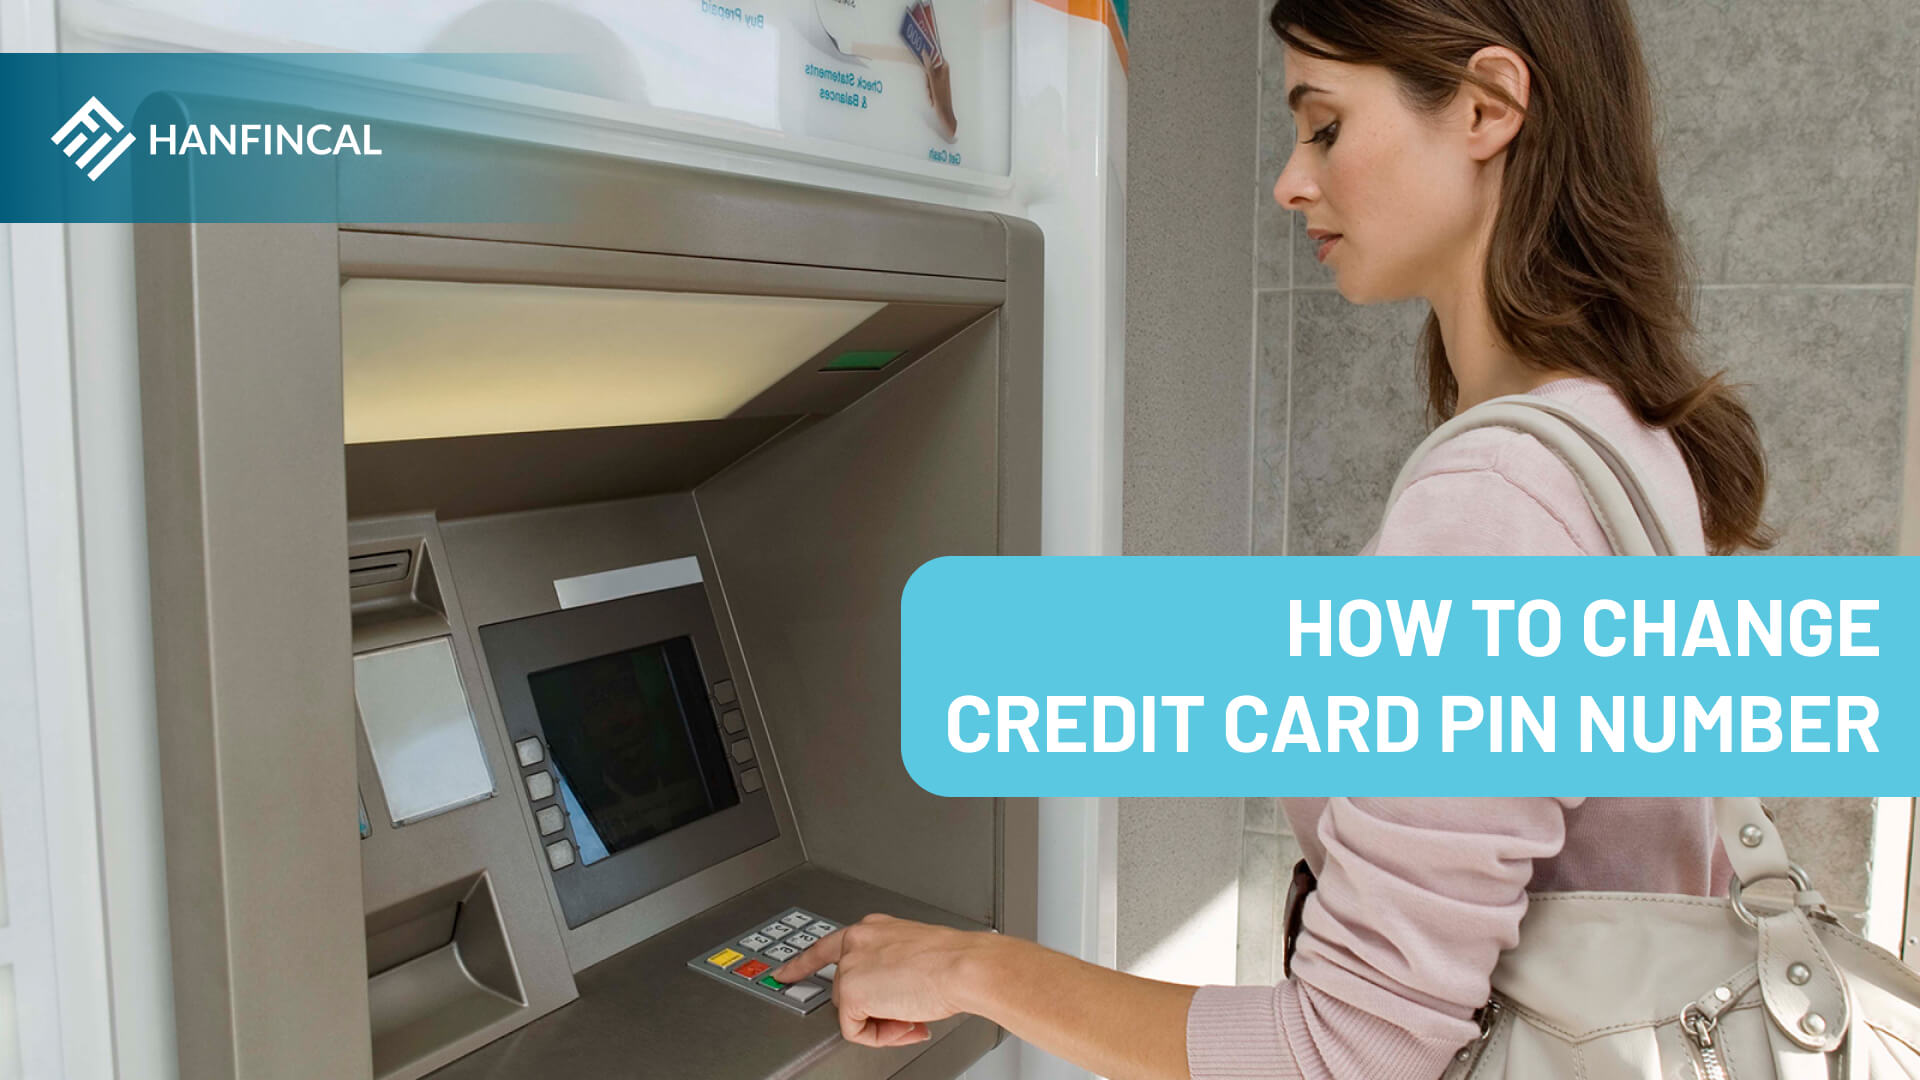 How to change a credit card pin number?